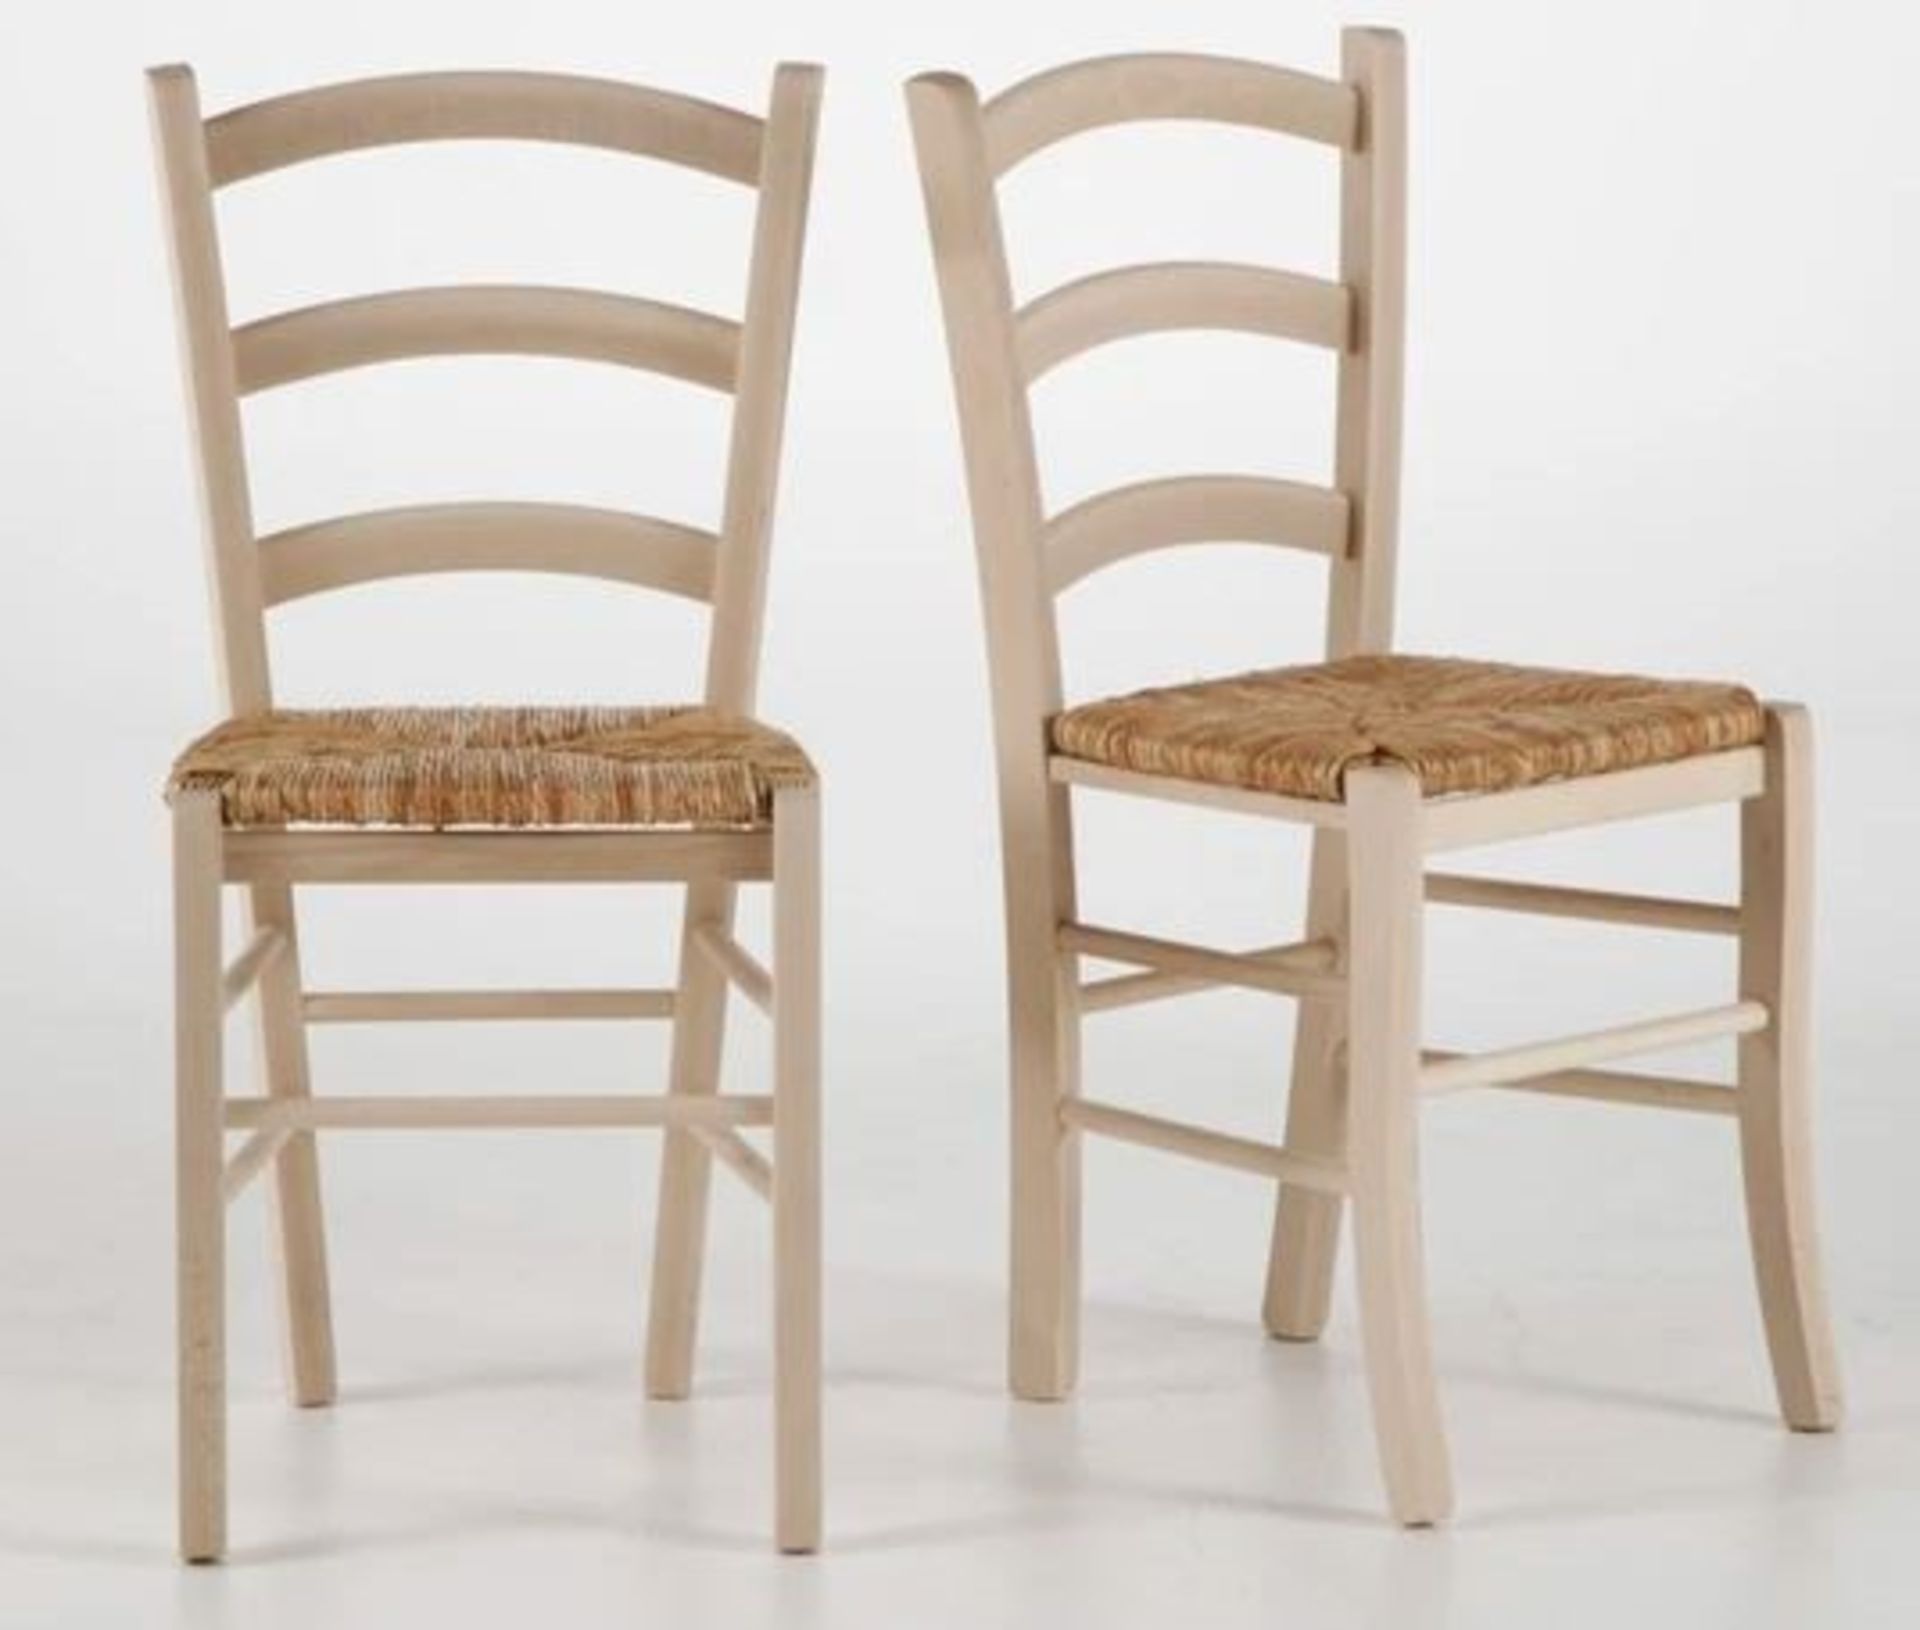 1 GRADE A ASSEMBLED SET OF 2 DESIGNER PERRINE FARMHOUSE CHAIRS IN SOLID BEECH WITH AN UNTREATED - Image 2 of 2